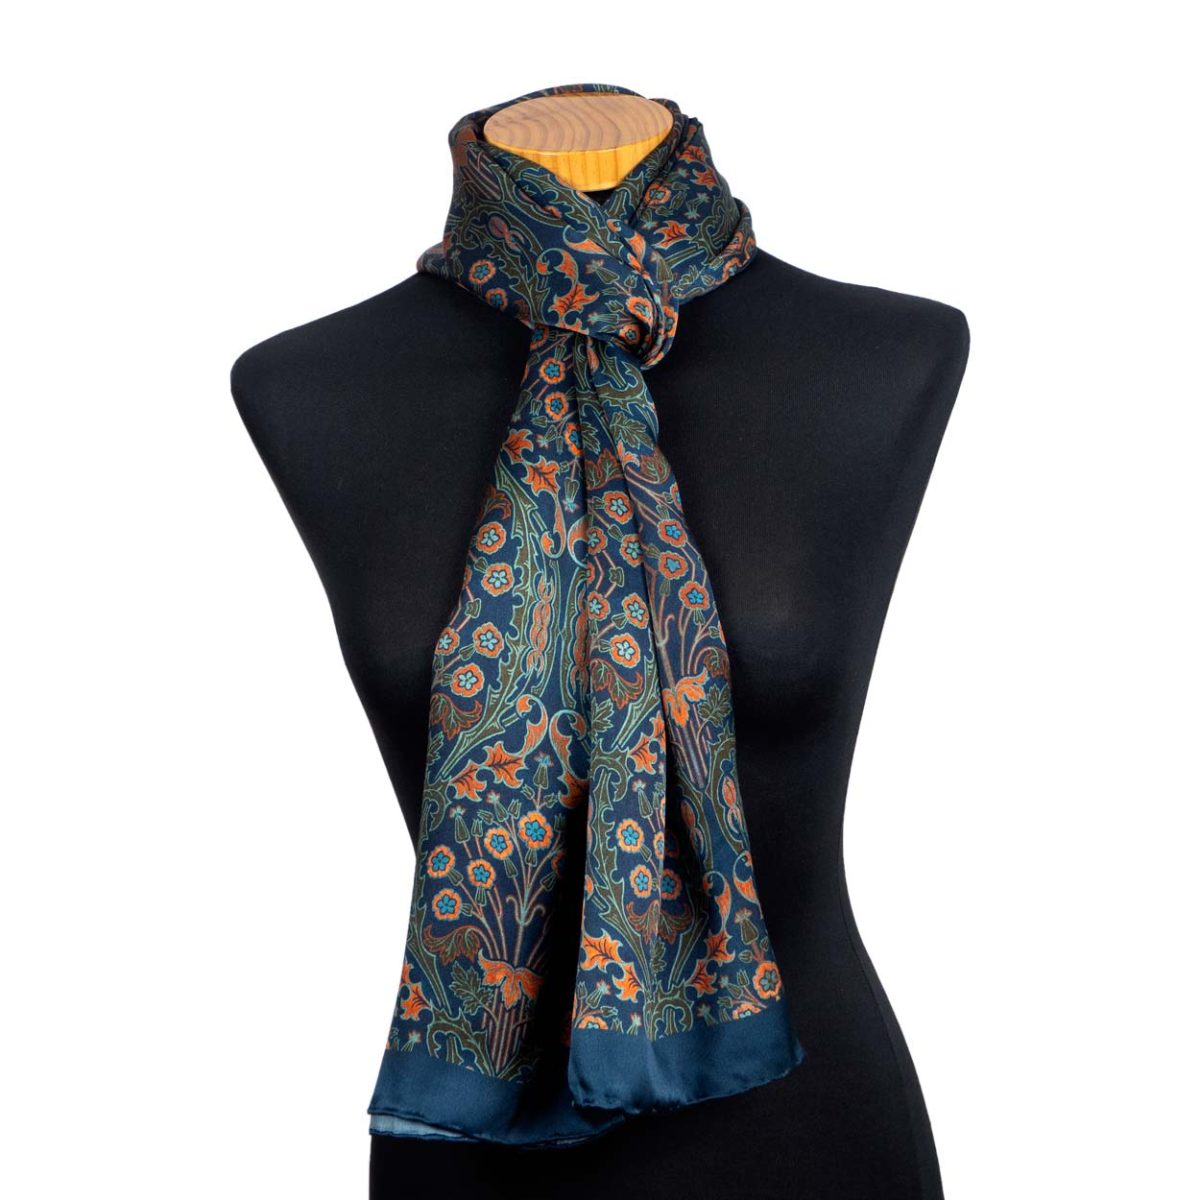 Blue scarf with floral print inspired by Art Nouveau